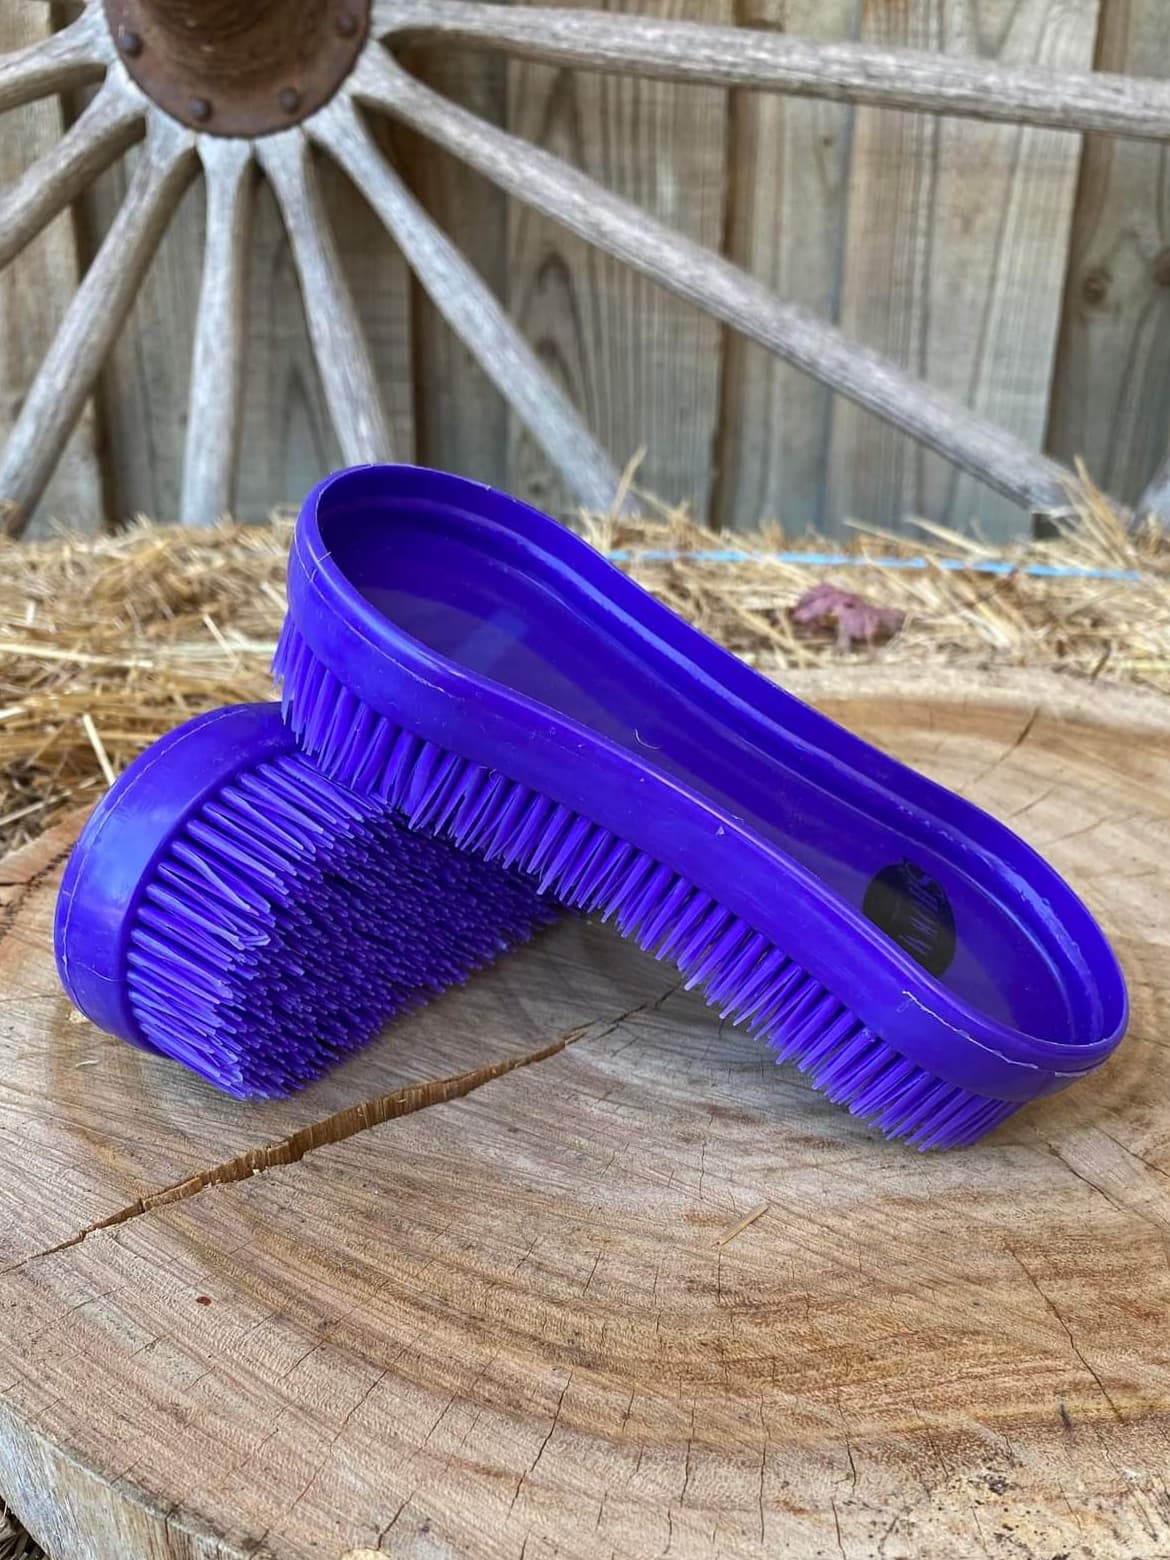 Comb - Platic Purple Curry Brush for Change in Season Grooming